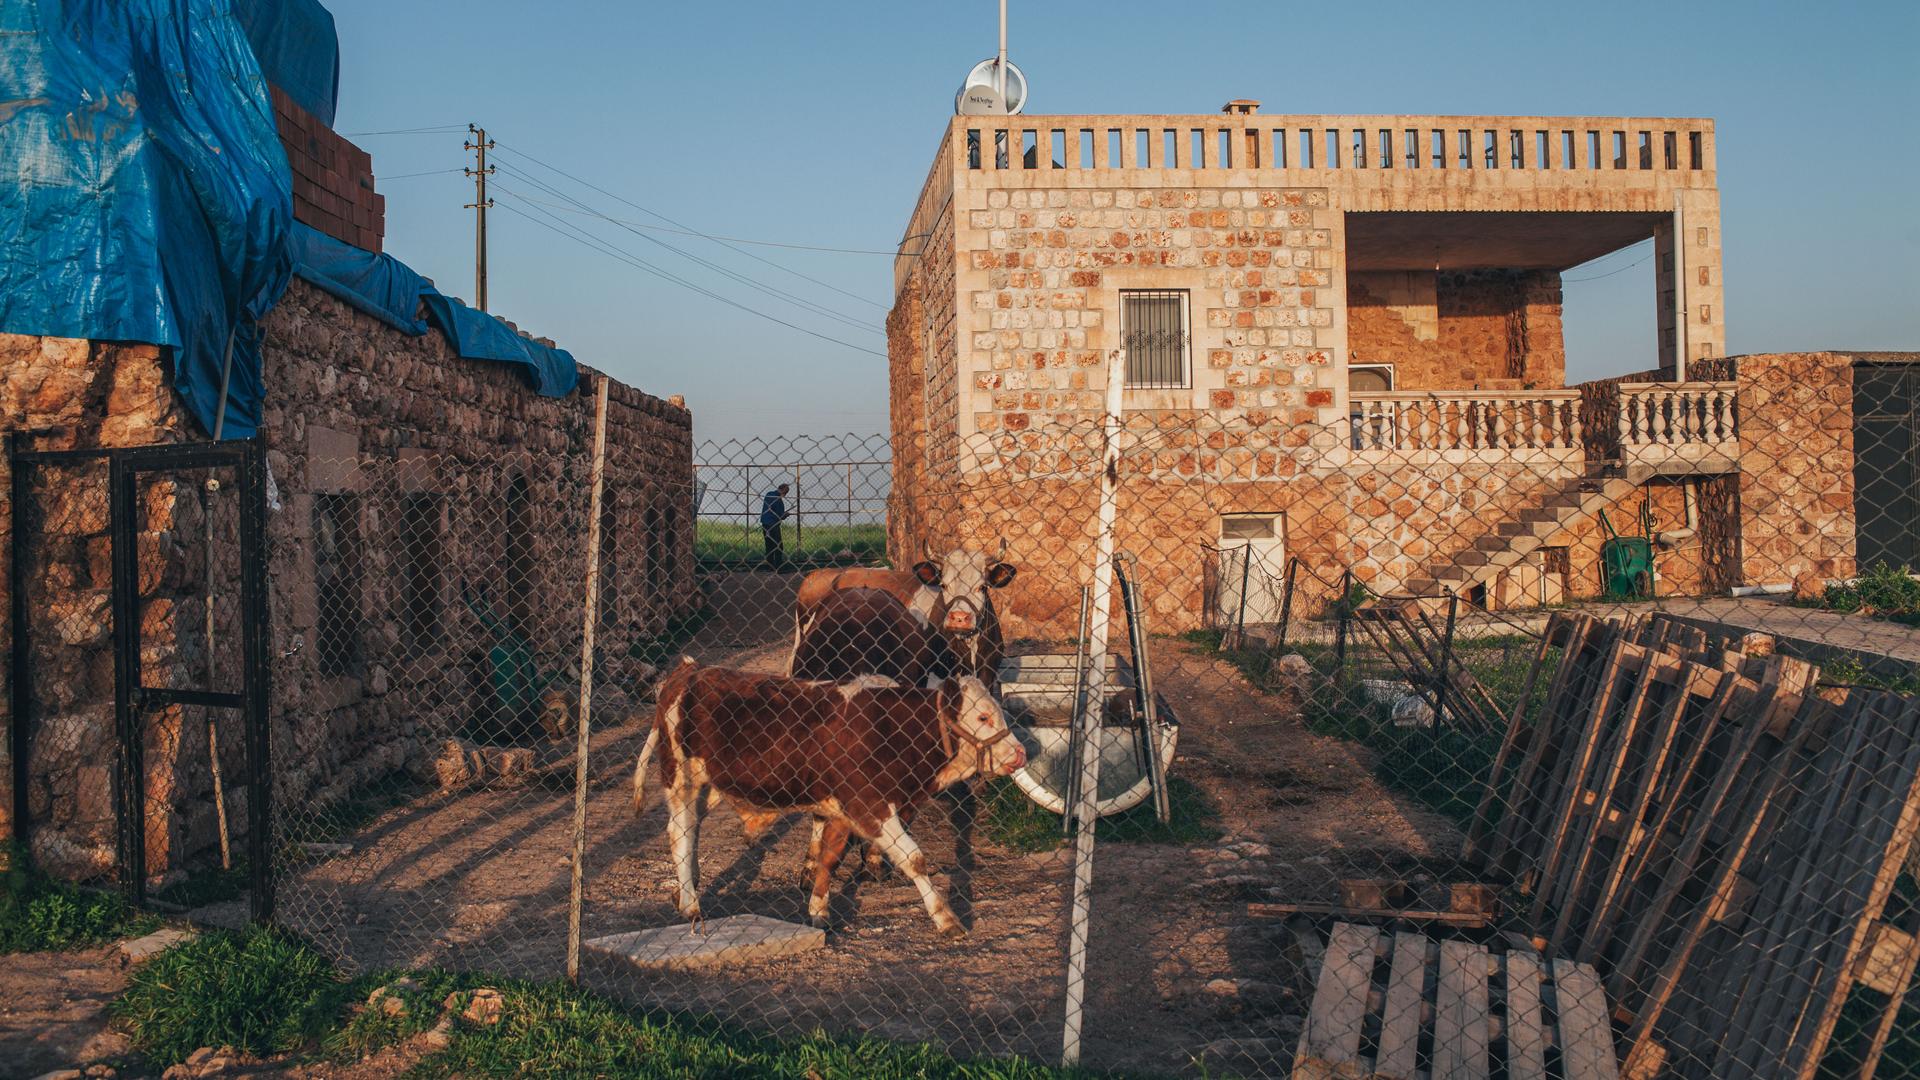 Life in Kafro is now a mix of old and new as families mix their traditional ways of life with the European ways they adopted during decades of exile.